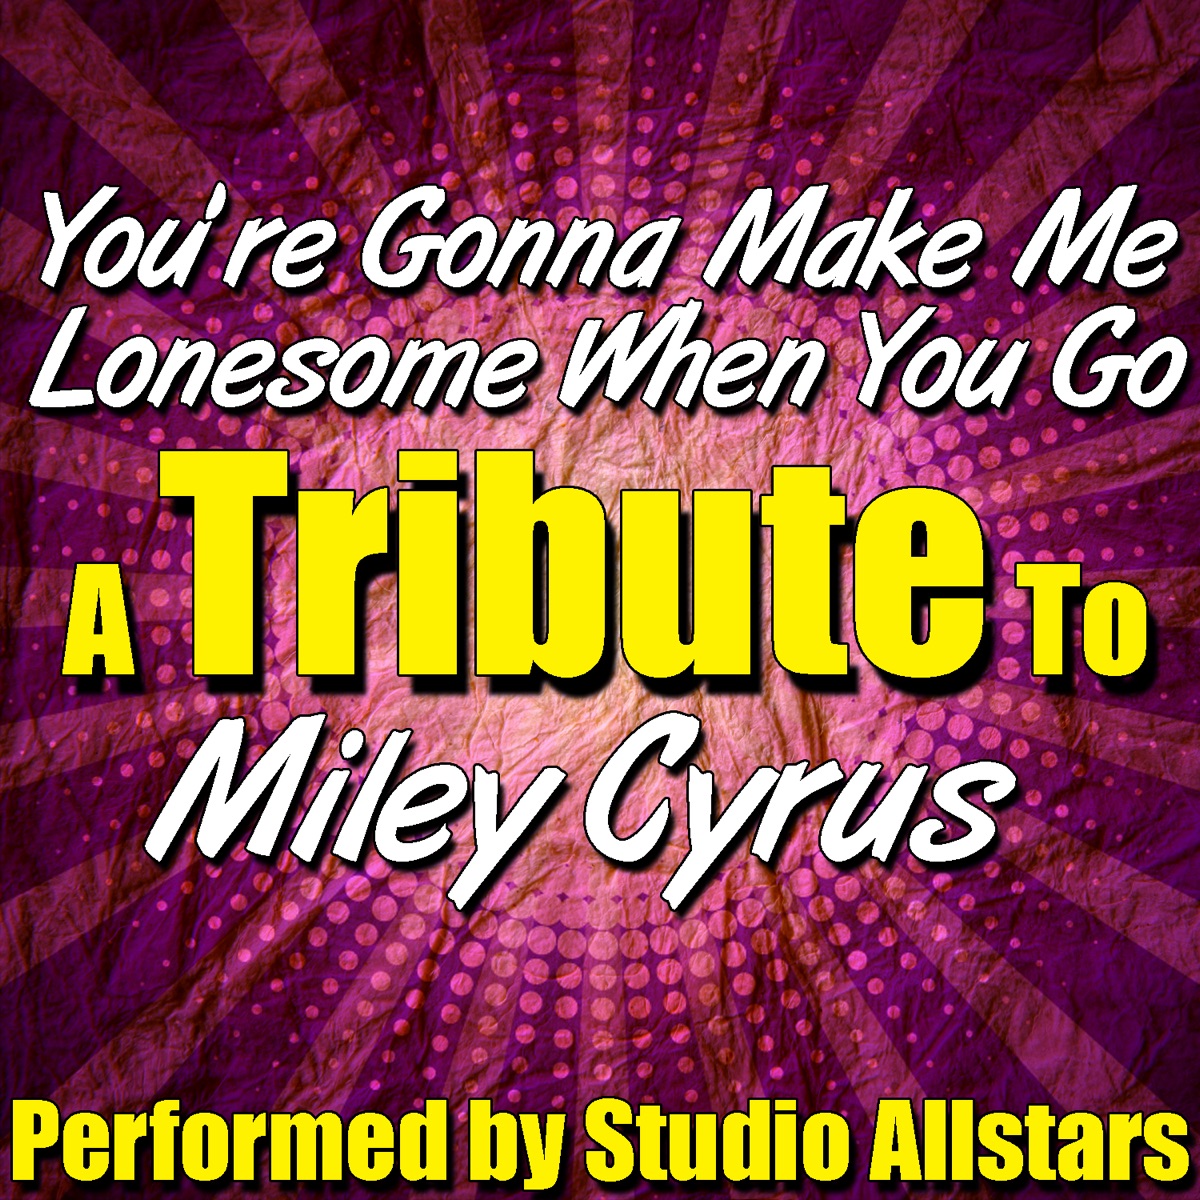 You're Gonna Make Me Lonesome When You Go (A Tribute to Miley Cyrus) -  Single - Album by Studio All-Stars - Apple Music